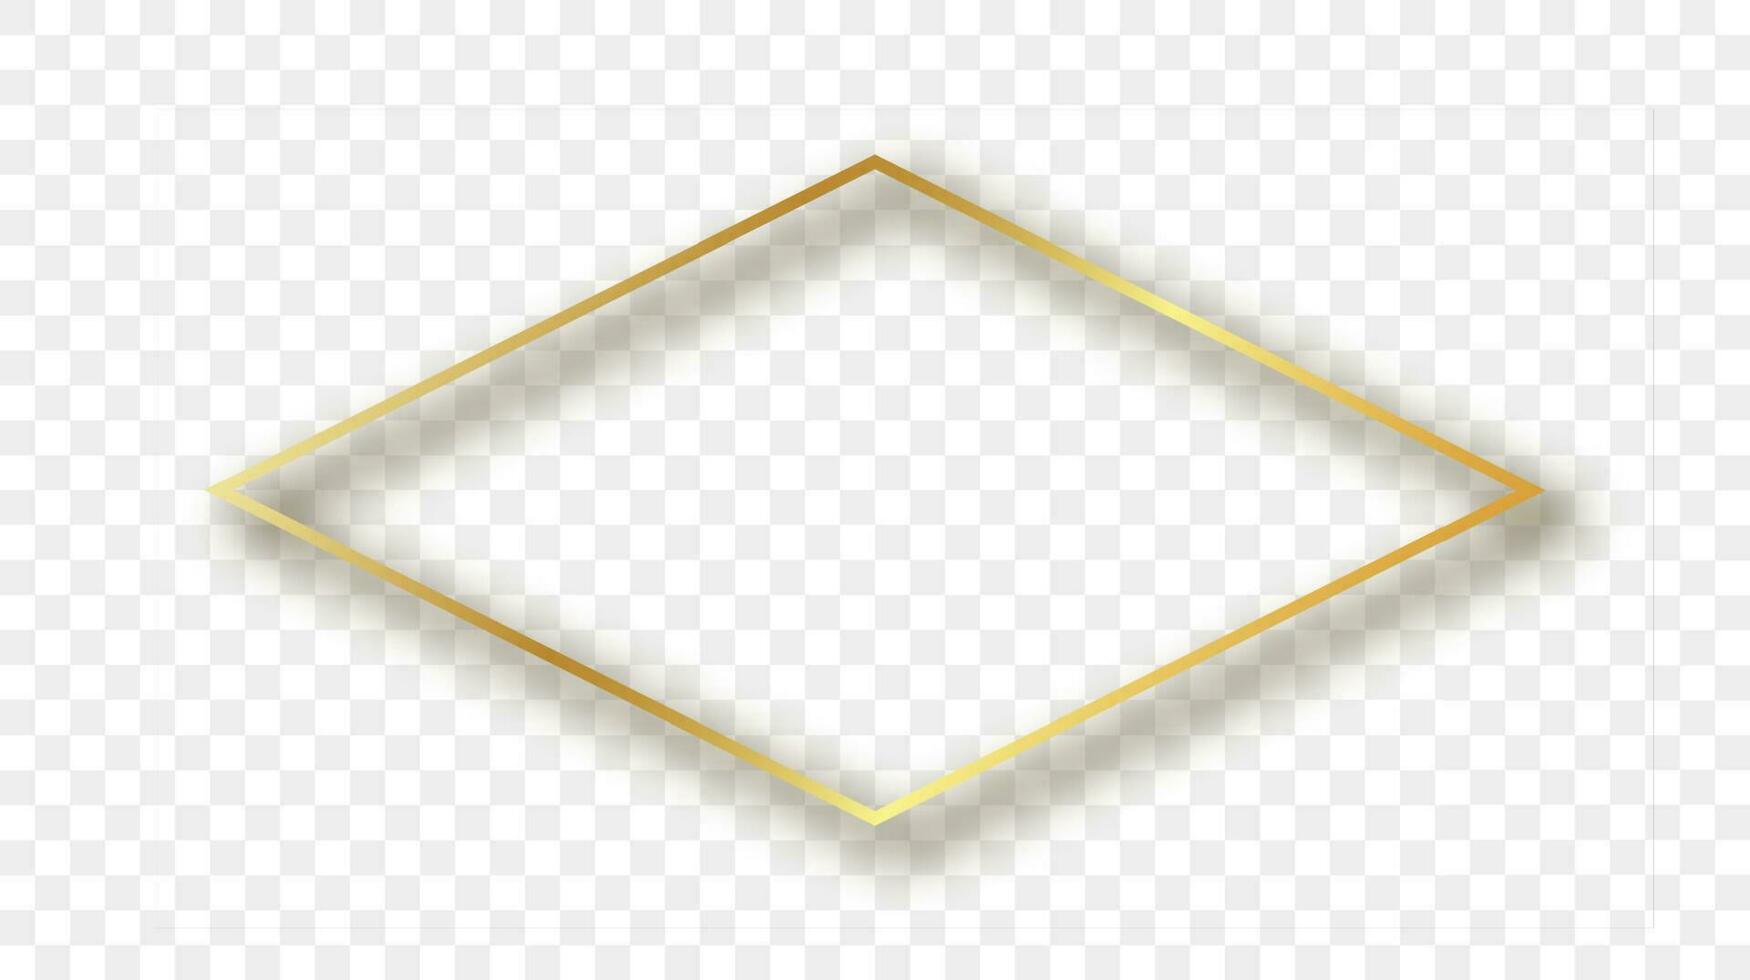 Gold glowing rhombus shape frame with shadow isolated on background. Shiny frame with glowing effects. Vector illustration.